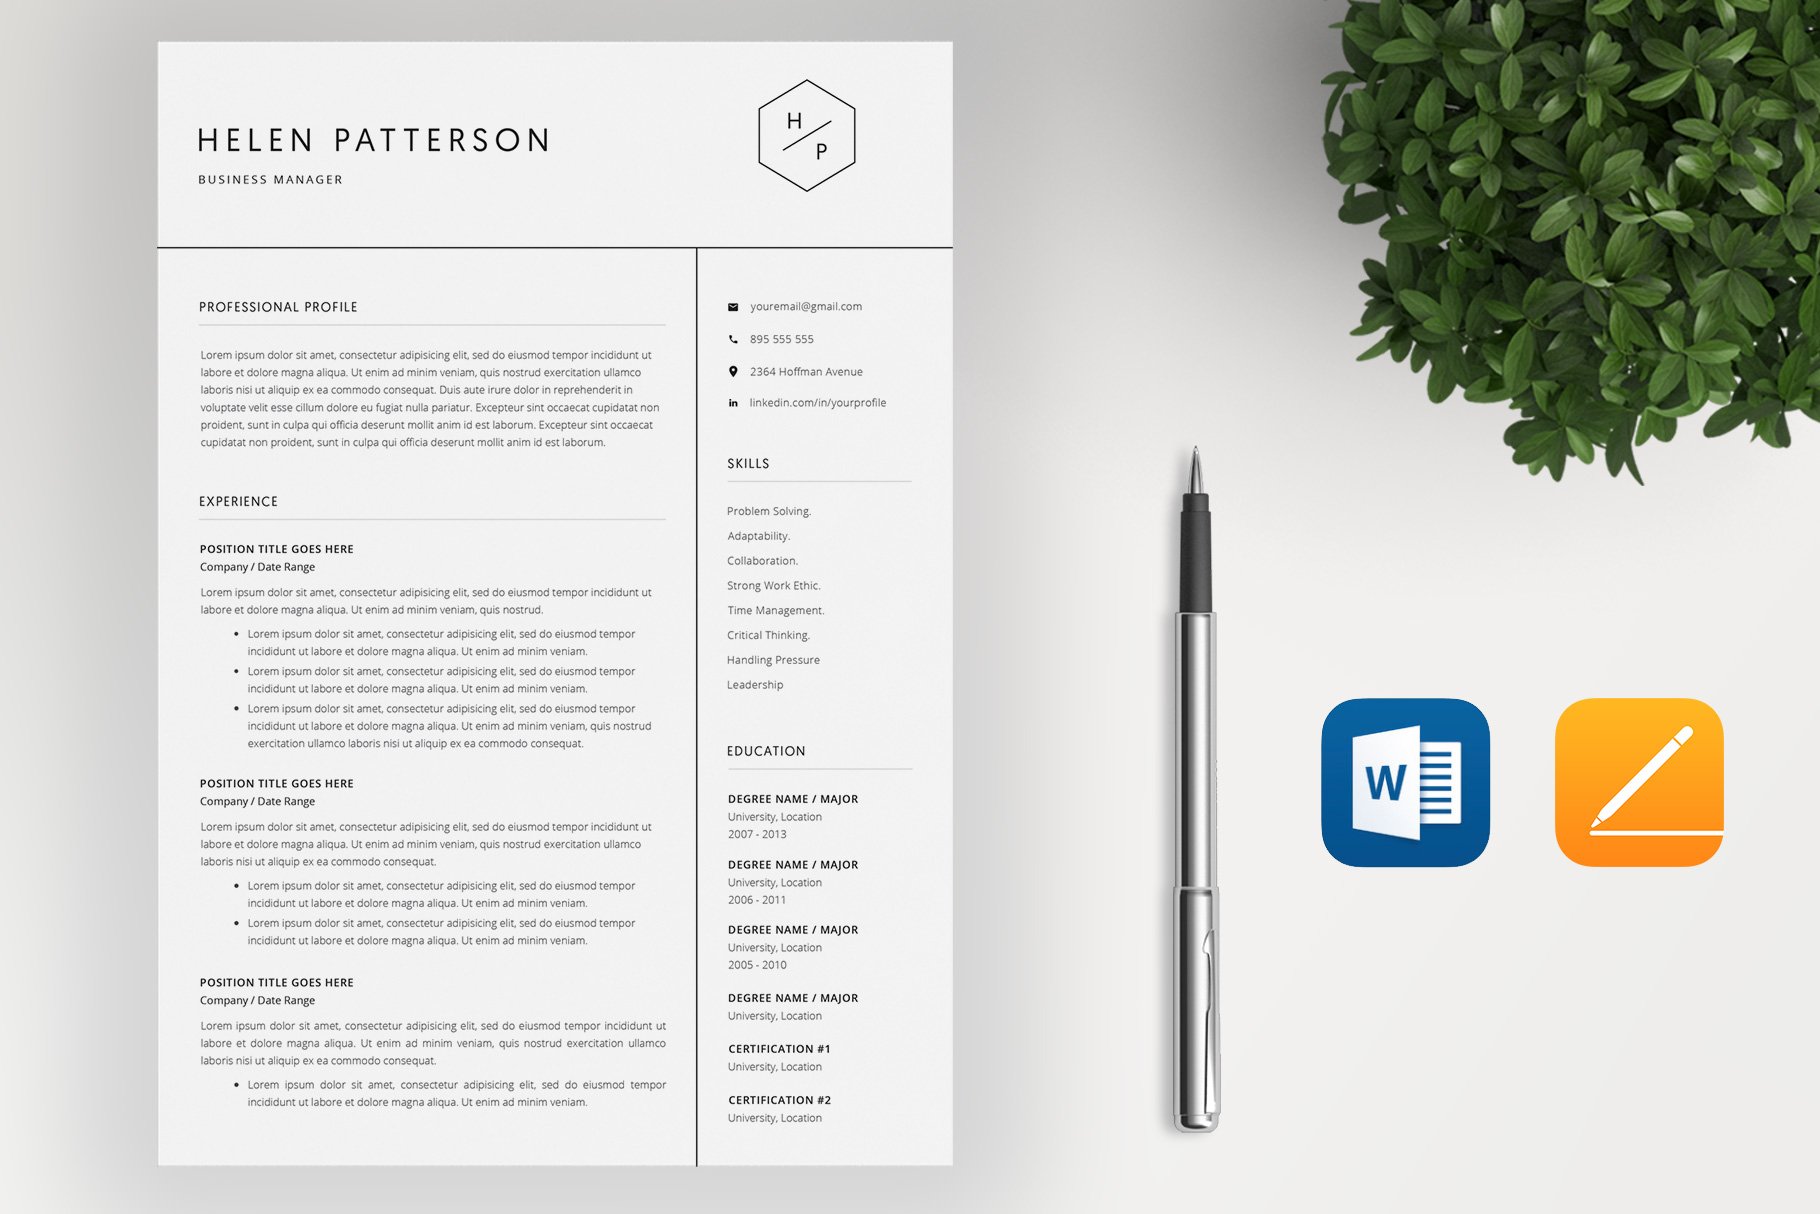 Resume Template and Cover Letter preview image.